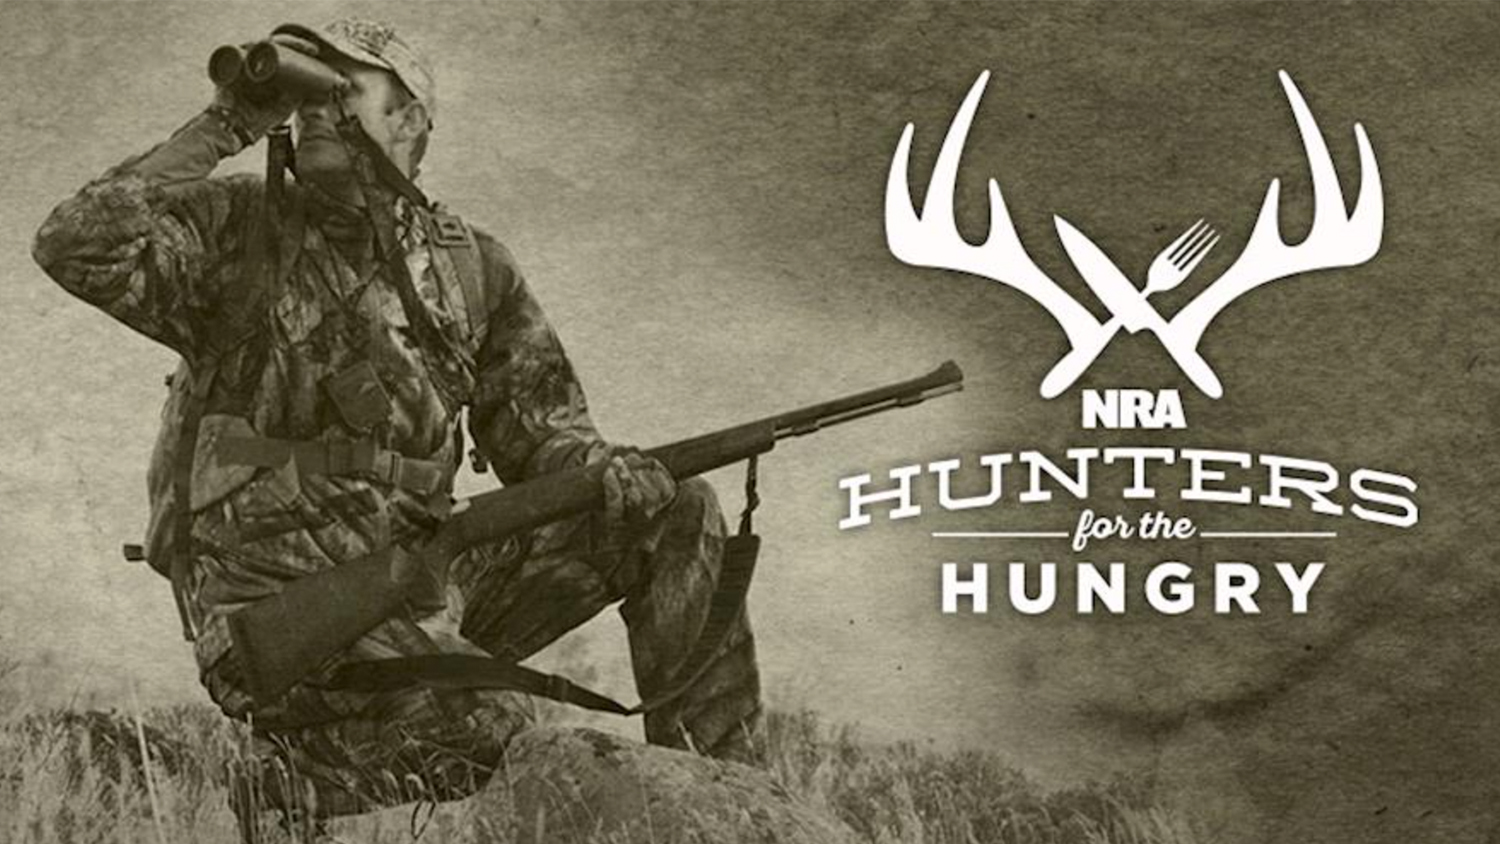 INFOGRAPHIC: Hunters for the Hungry